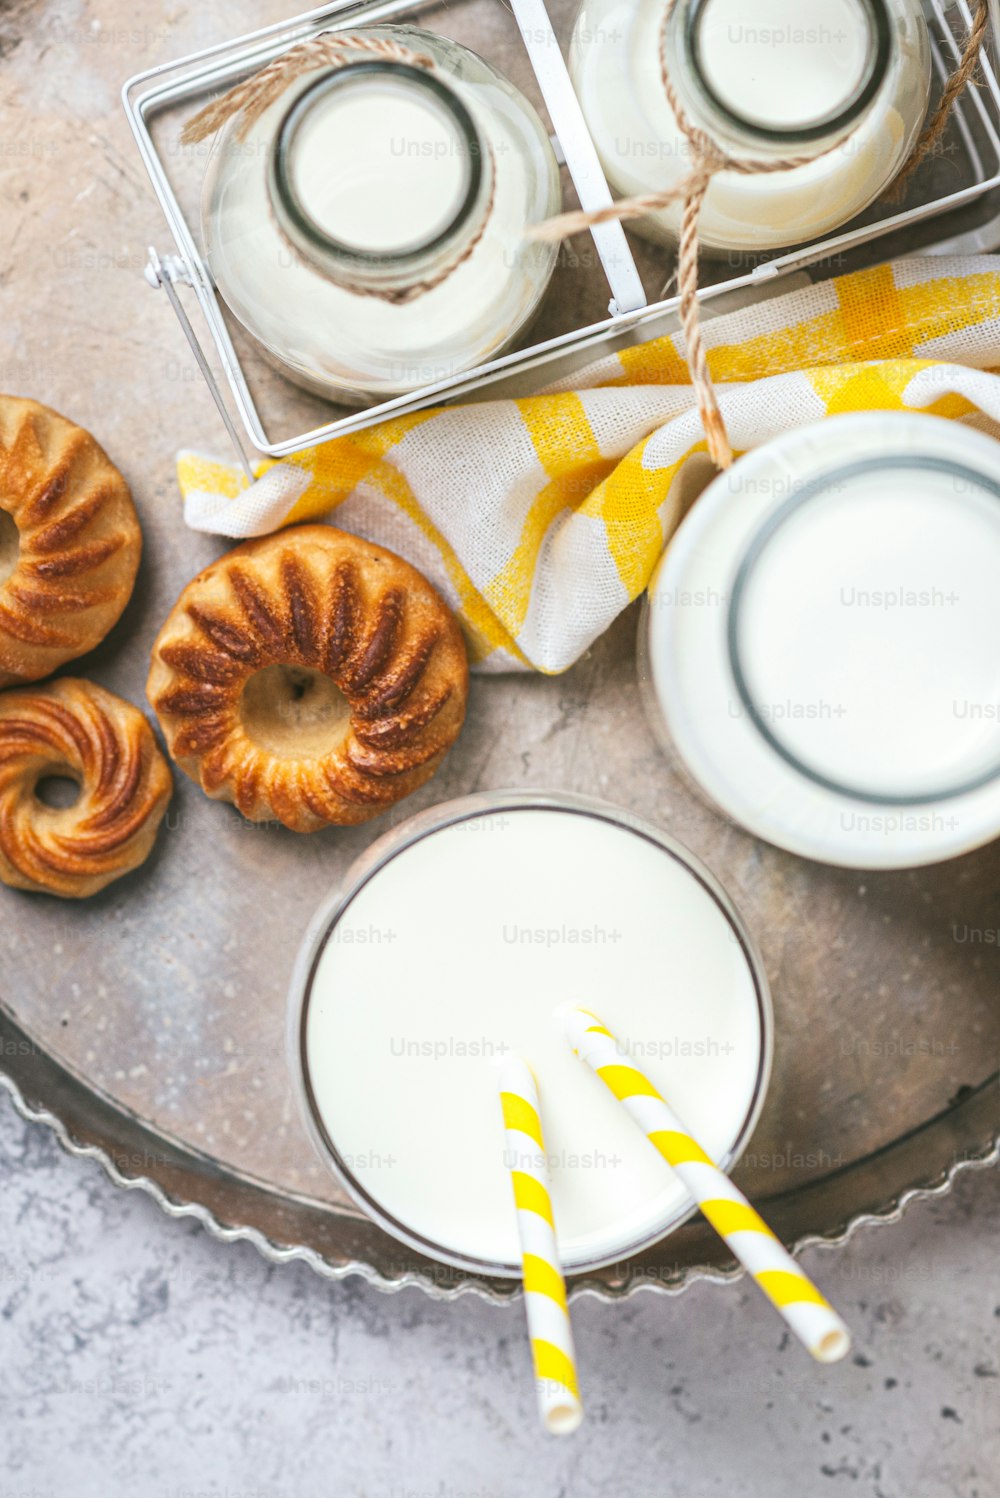 a tray of pastries next to a glass of milk